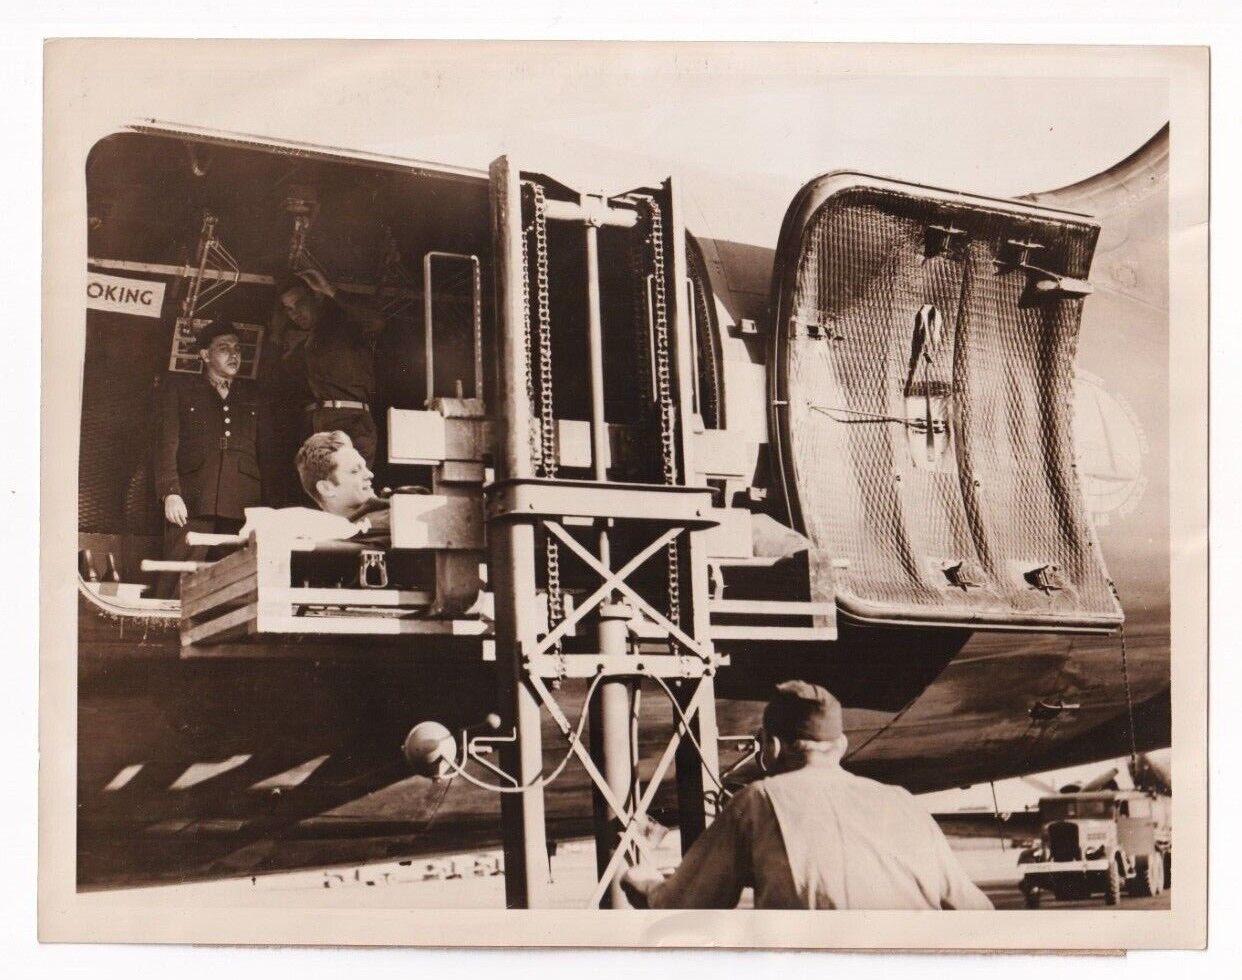 WWII GIANT AIR TRANSPORT & WOUNDED LOADED FOR BACK HOME FLIGHT 1944 Photo Y 323